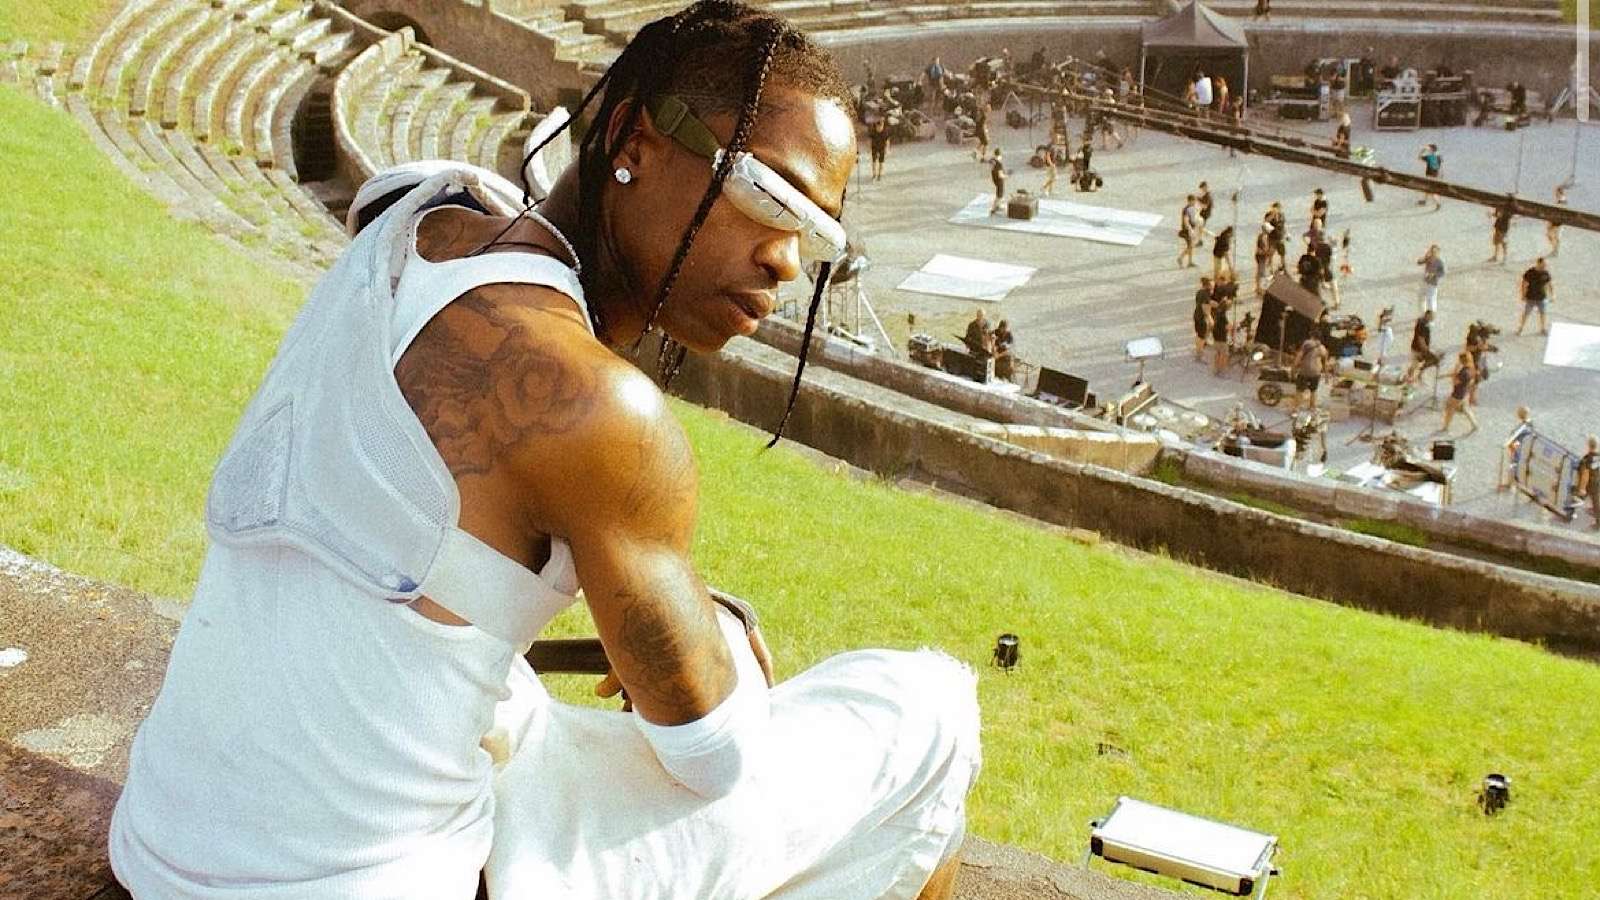 Travis Scott concert goers were at risk of injury during his Utopia tour debut.